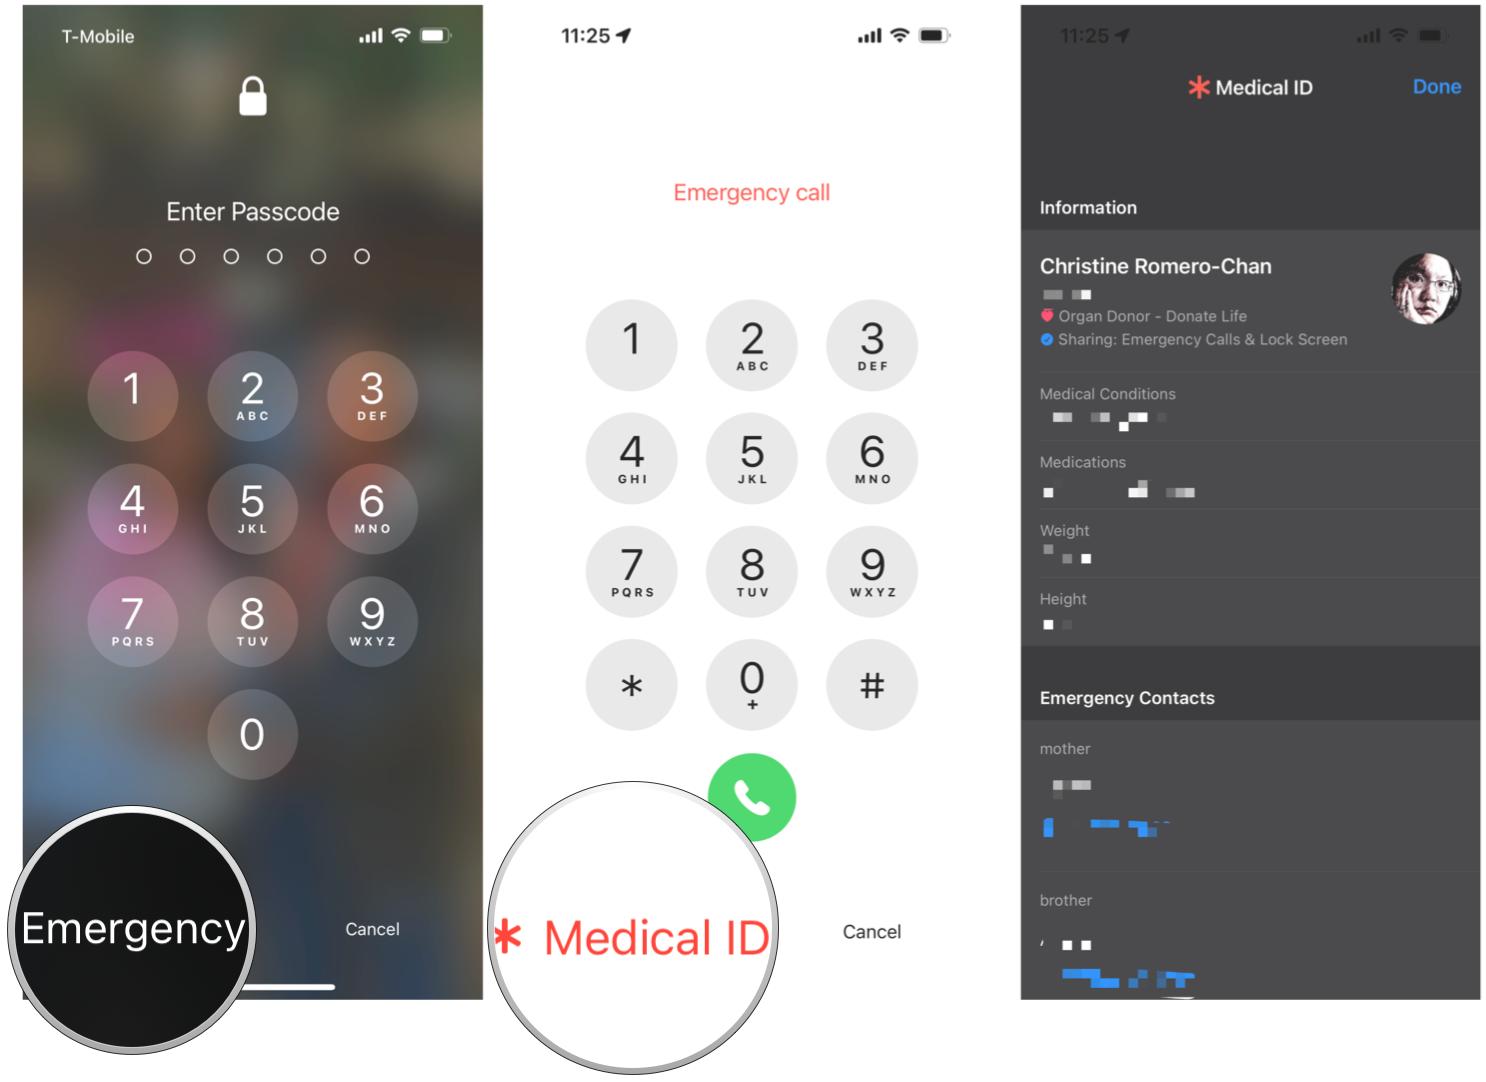 View someone's Medical ID on iPhone by showing: Bring up passcode entry screen on Lock Screen, tap Emergency, tap Medical ID